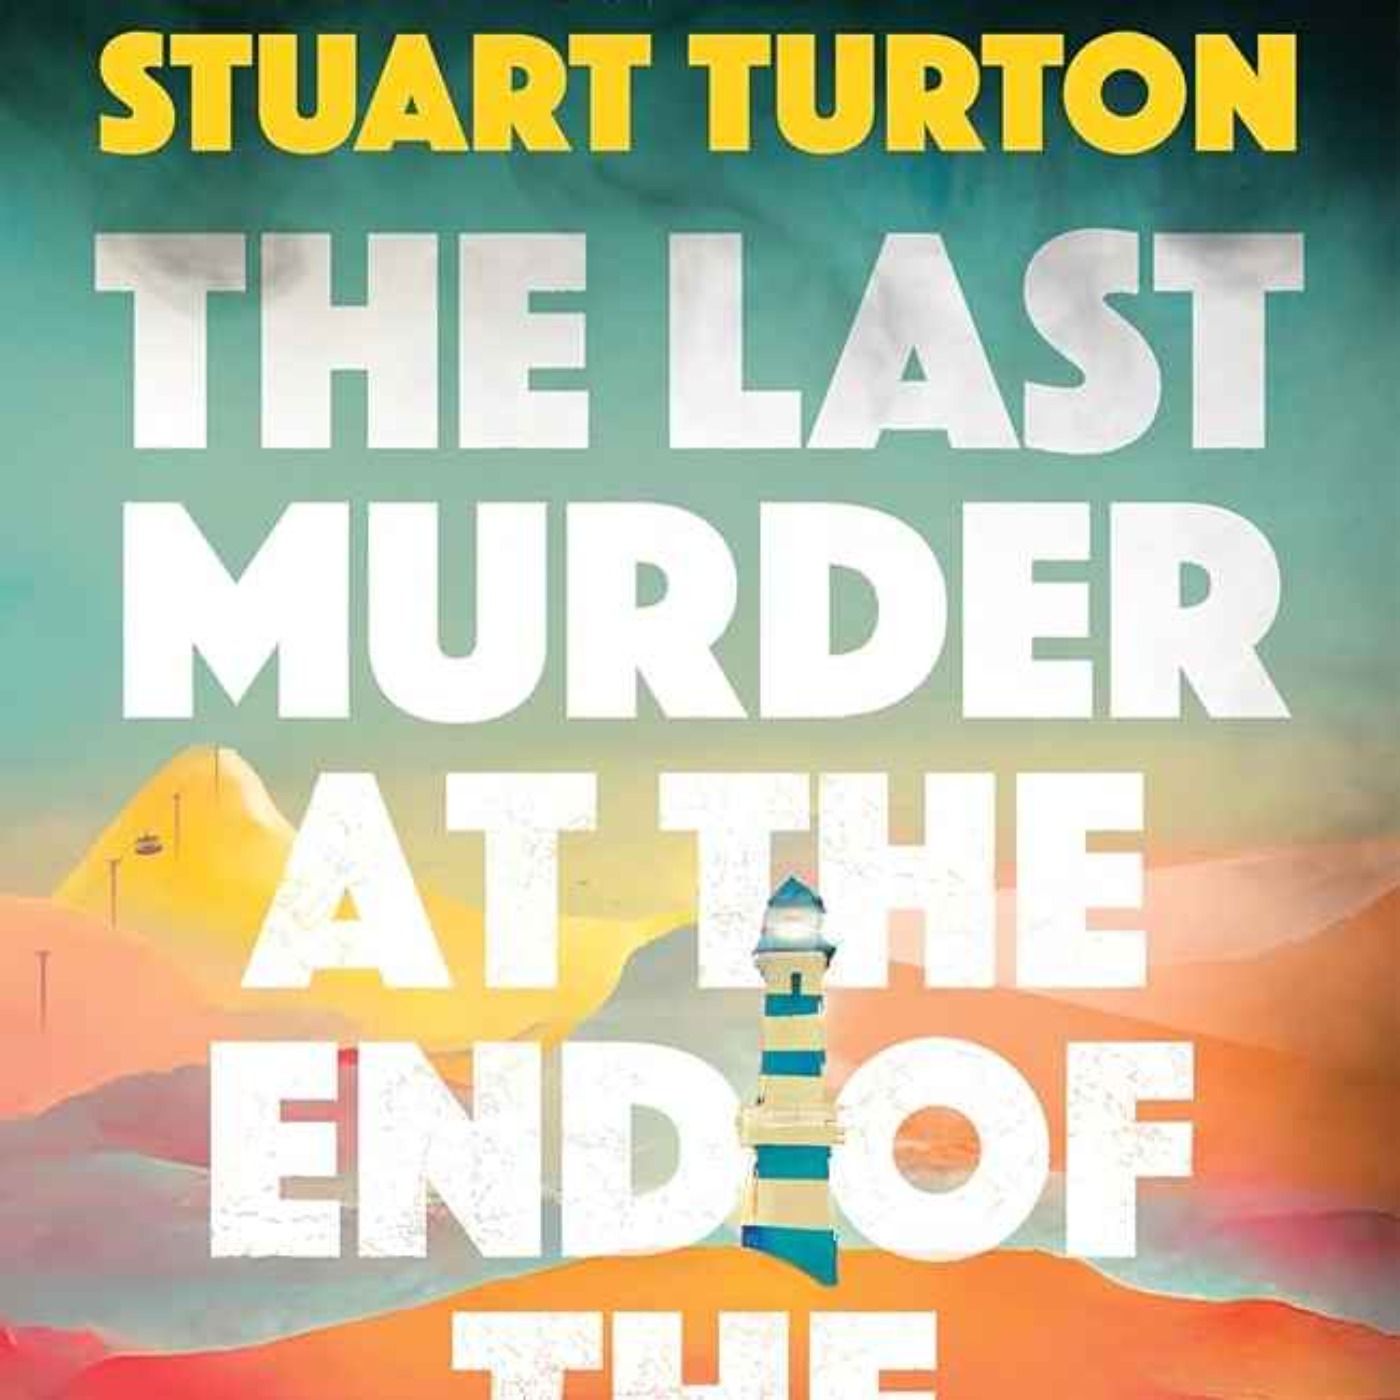 Little Atoms 890 - Stuart Turton’s The Last Murder At The End Of The World